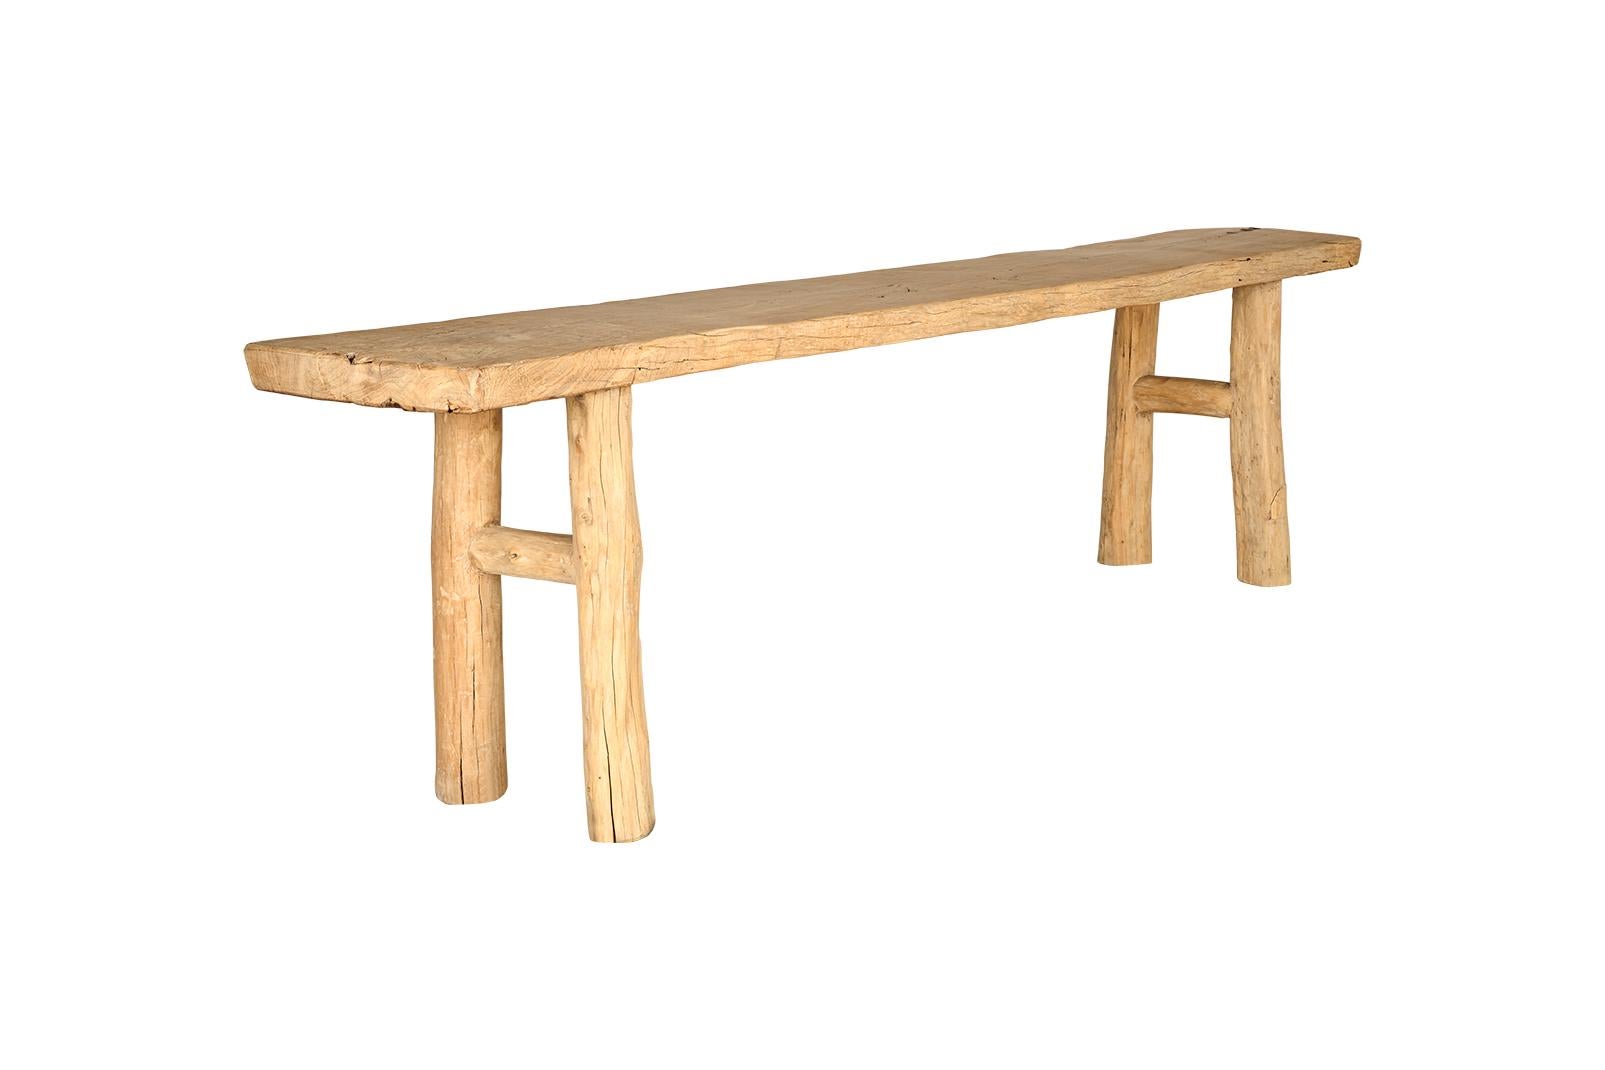 Organic Modern Provincial Serving Table in Reclaimed lm with Staple Cleat Accents For Sale